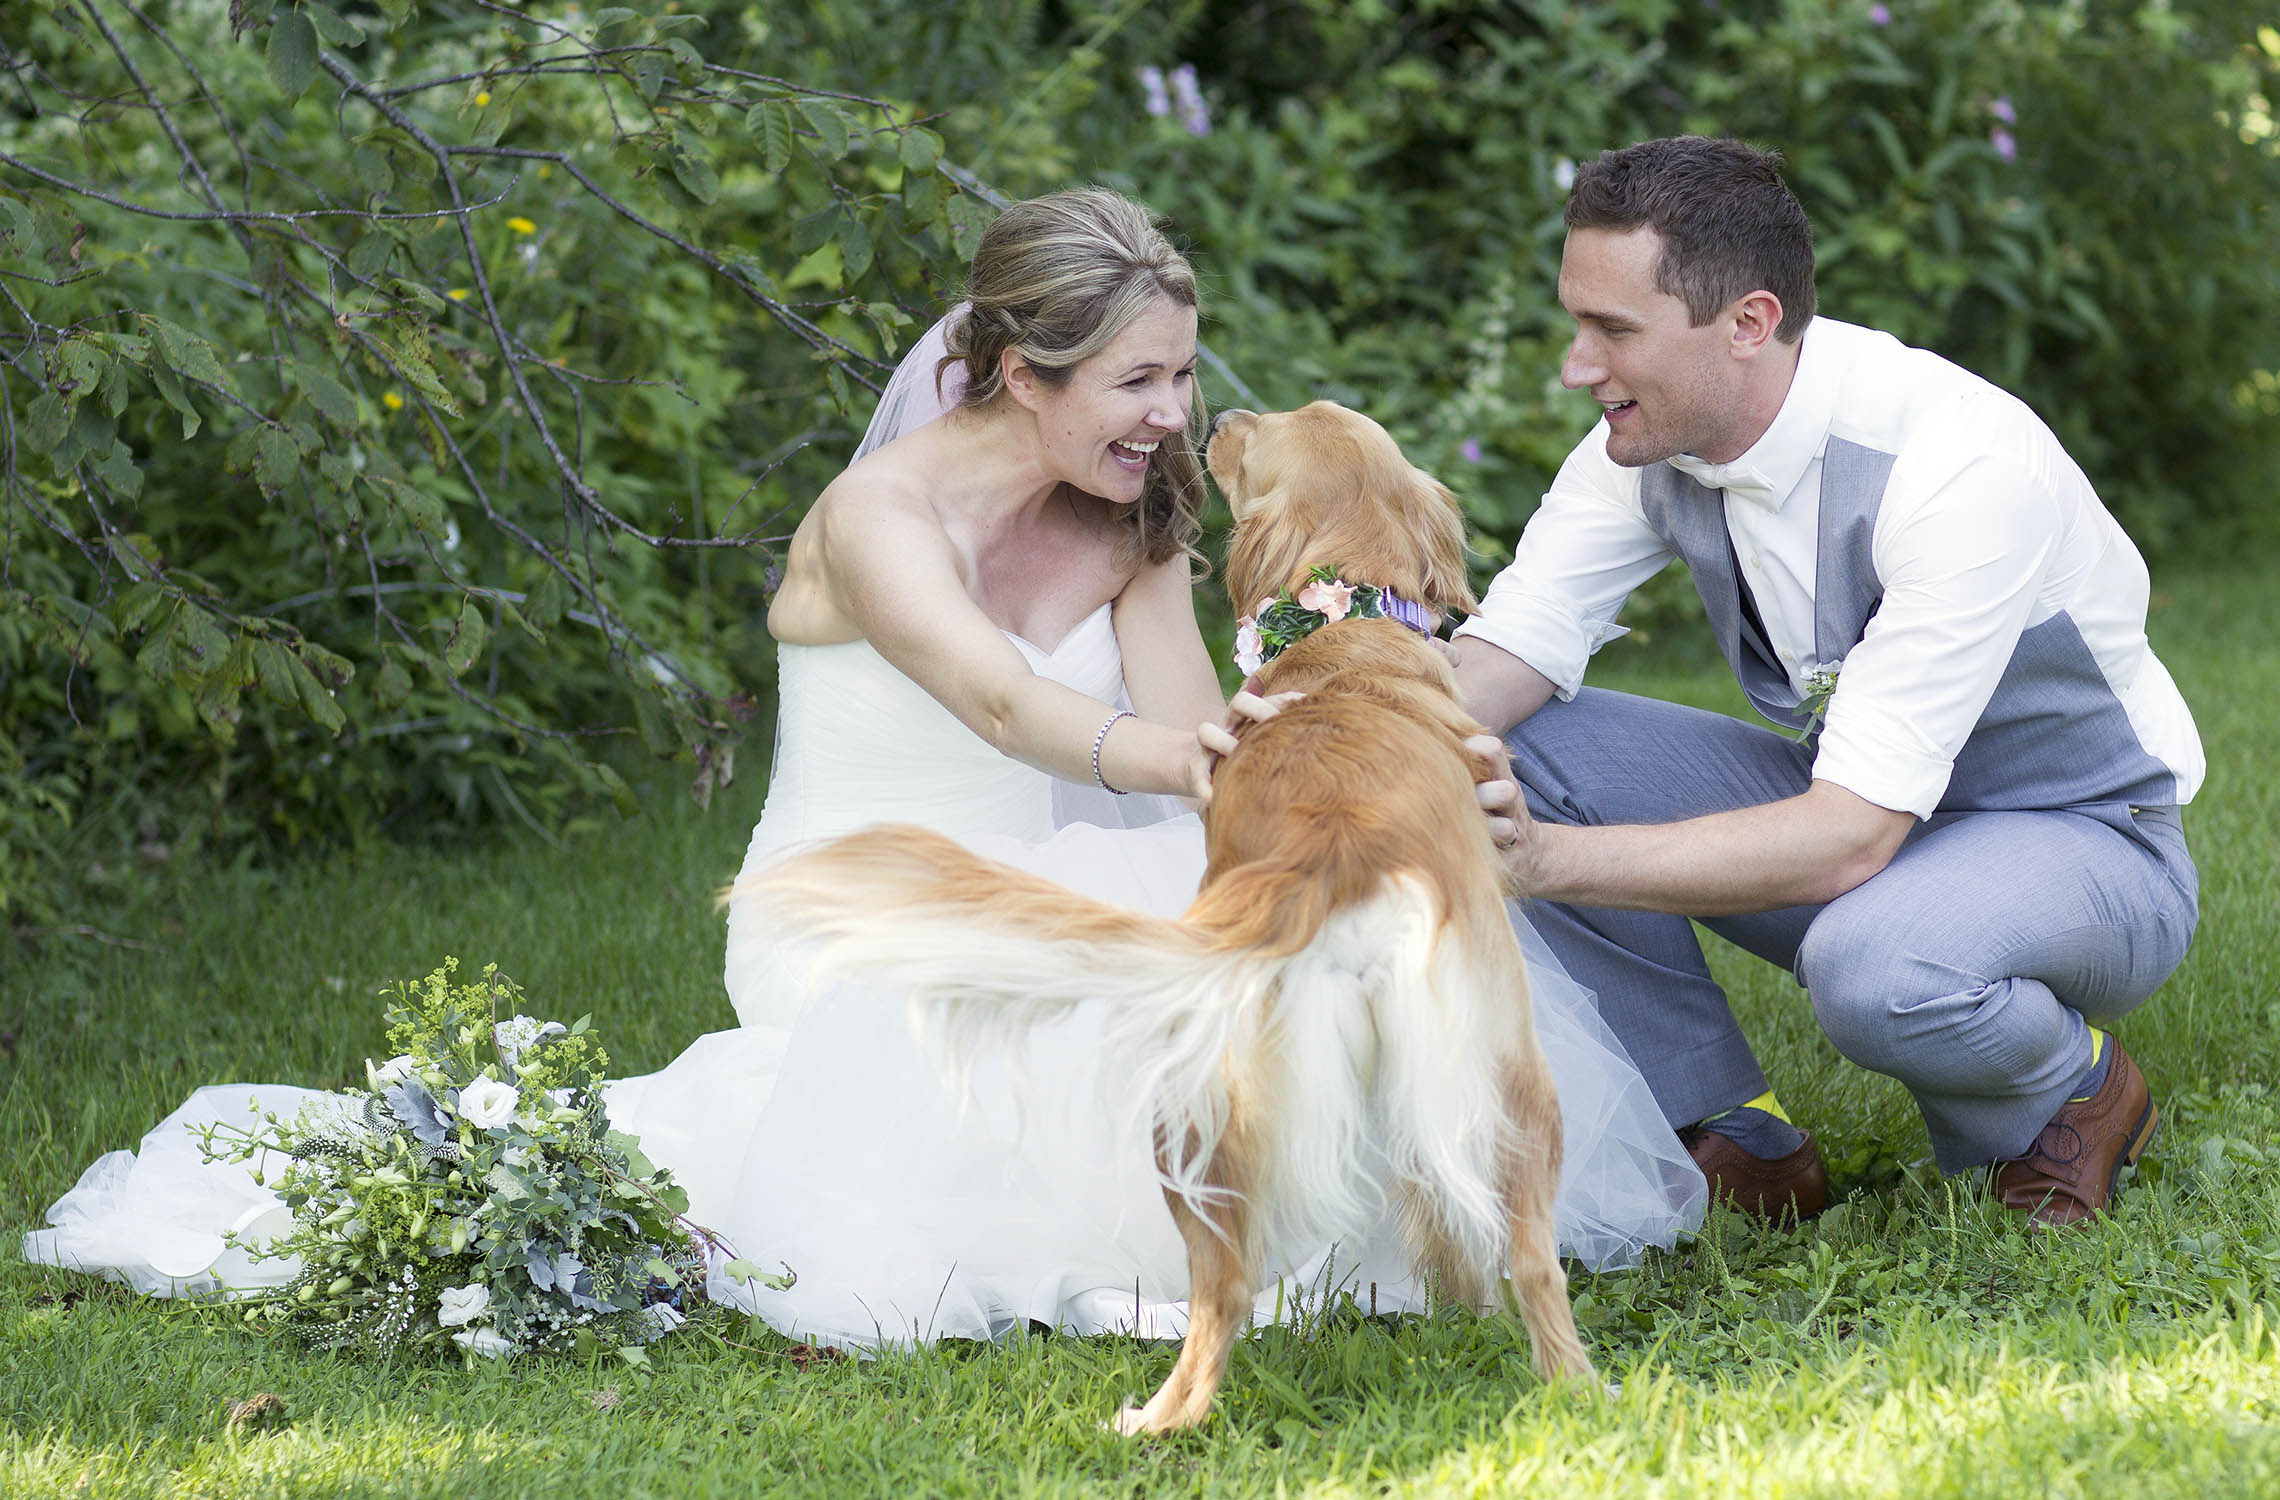 Wedding bride and groom with young golden retriever in park like setting.